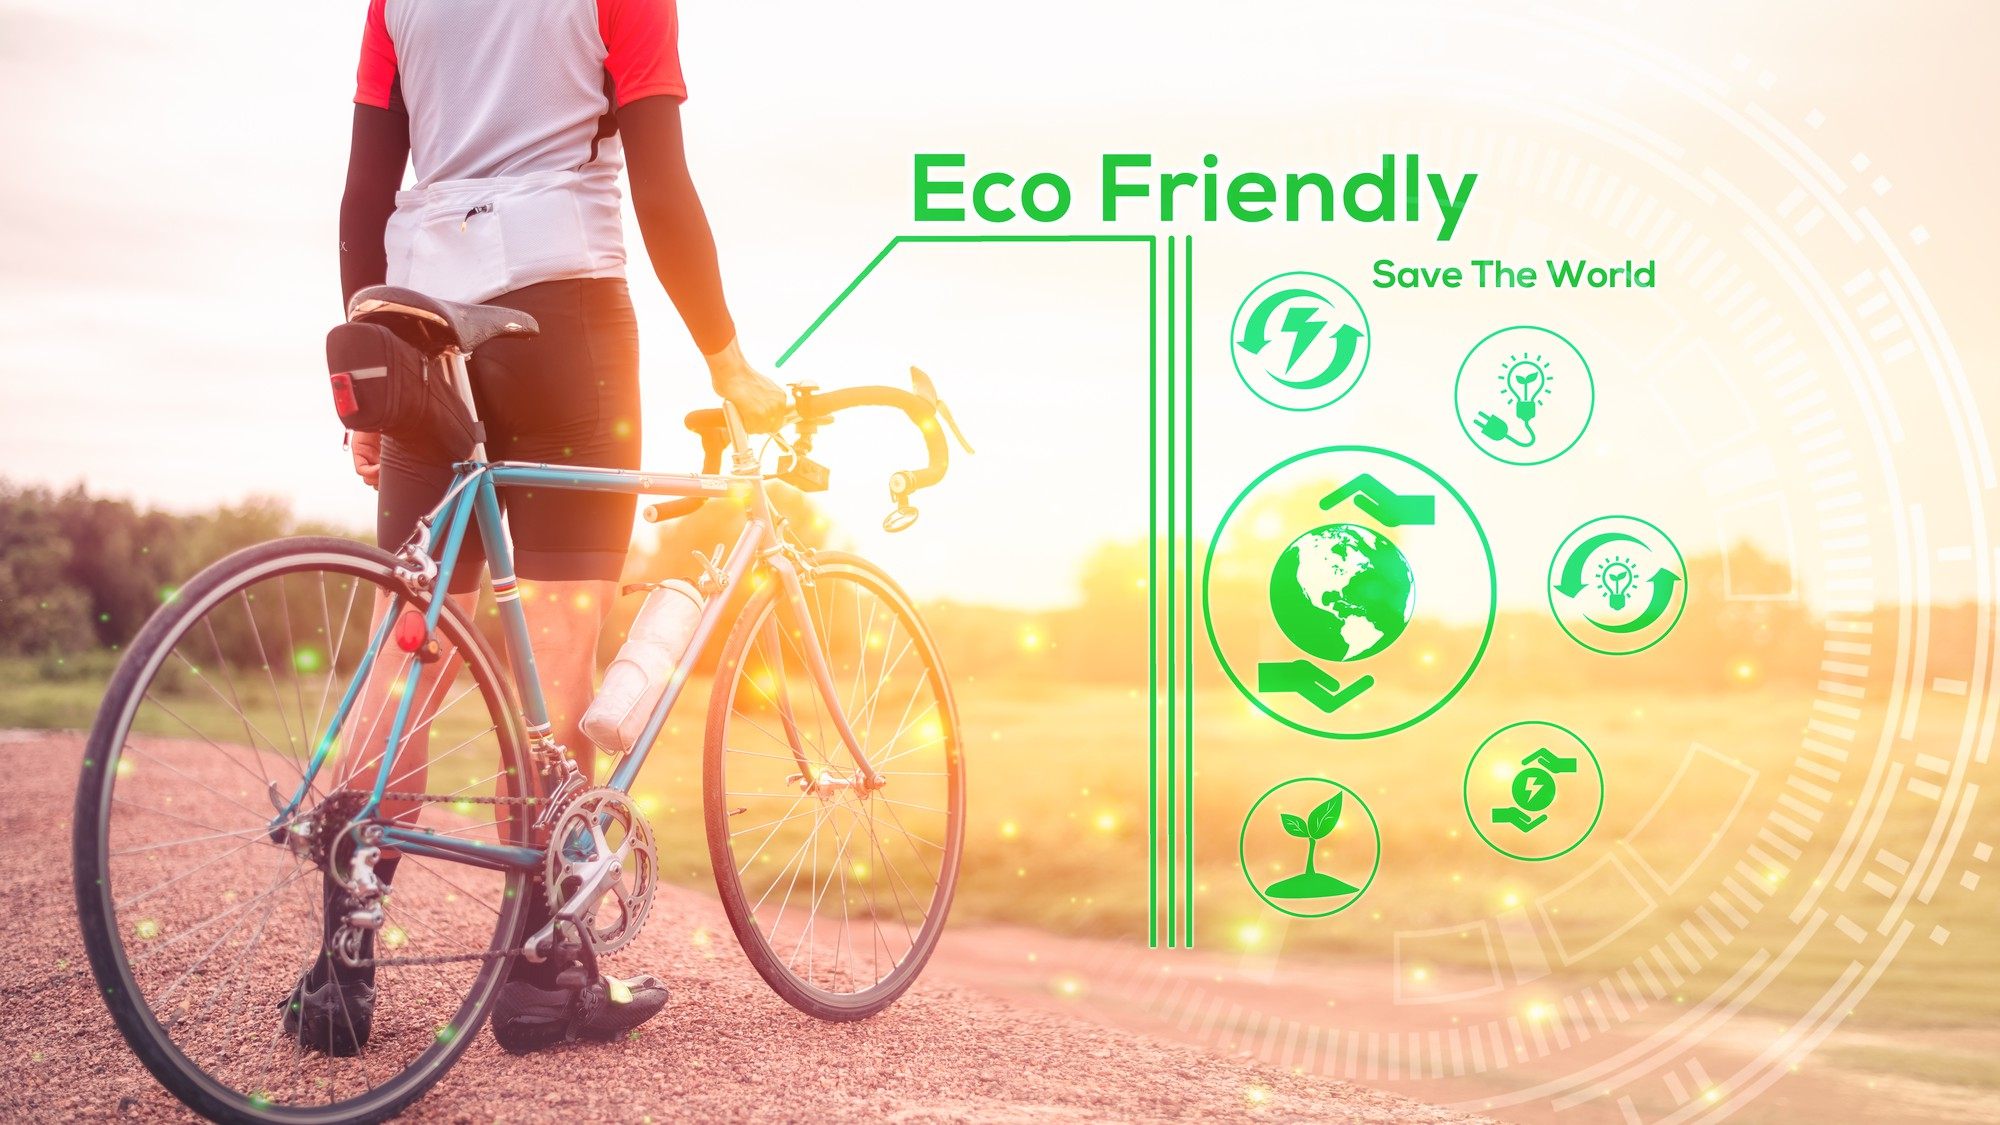 eco-friendly travel action by using public transportation